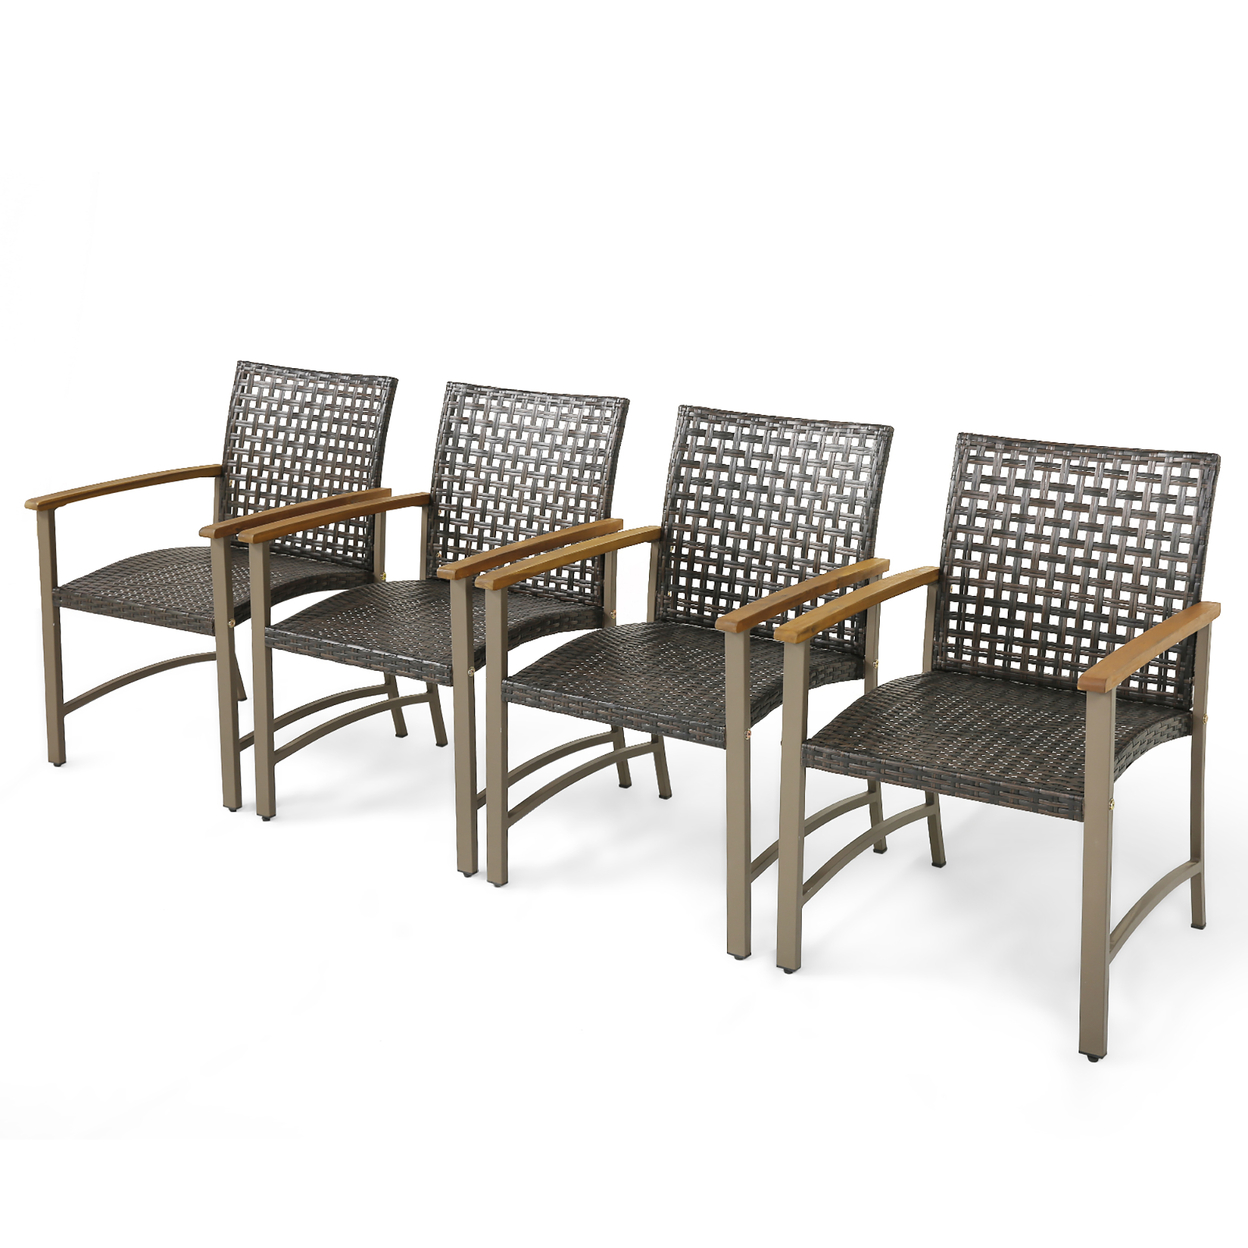 Outdoor Rattan Chair Set Of 4 Patio PE Wicker Dining Chairs W/ Acacia Wood Armrests Balcony Poolside